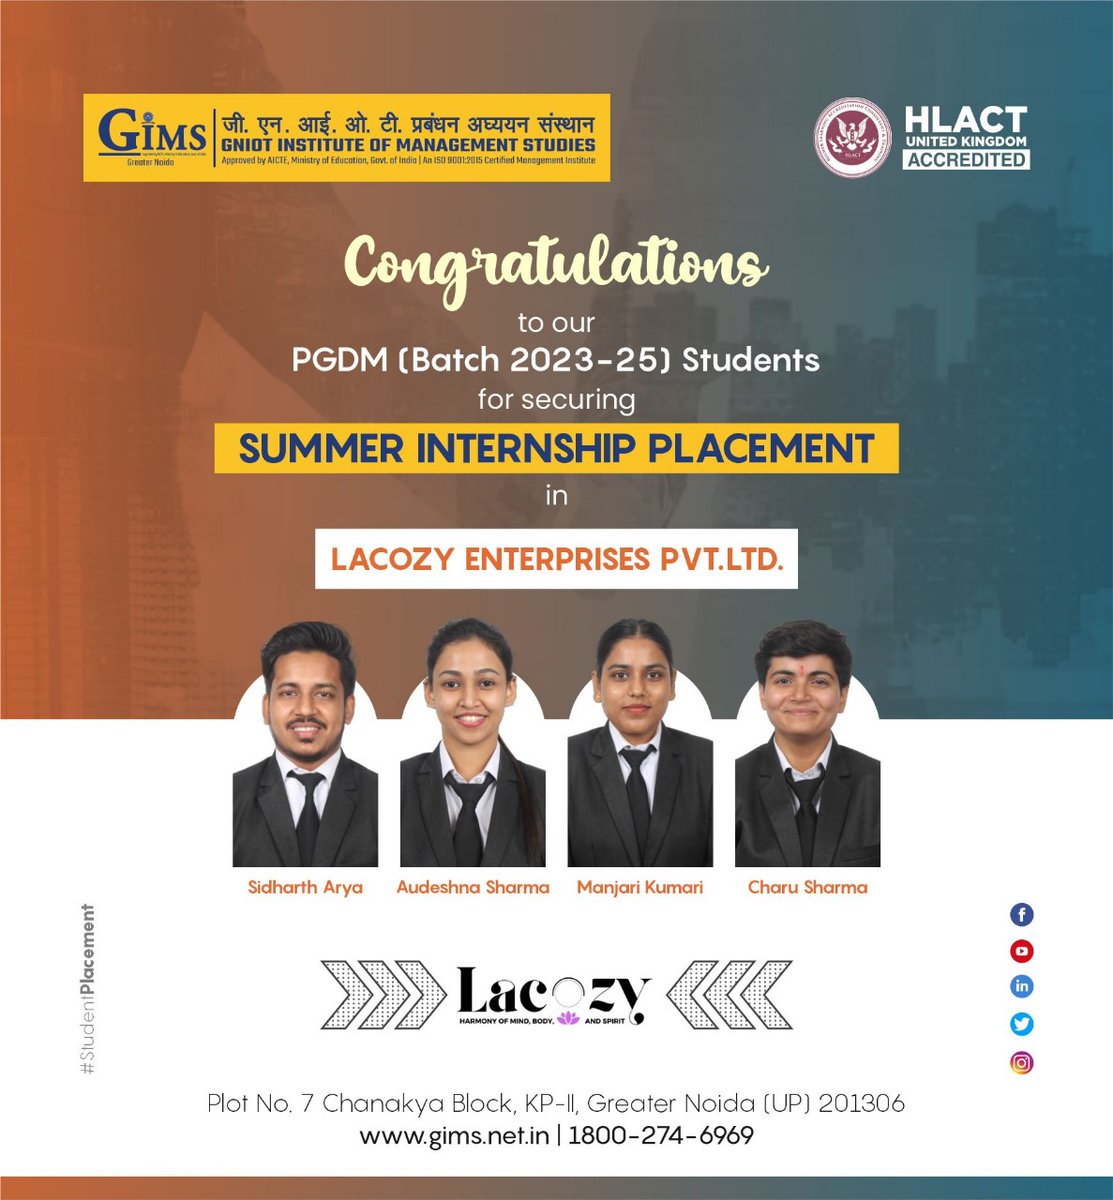 GIMS, Greater Noida proudly announces the SIP selection of its PGDM 2023-25 Batch students in Lacozy Enterprises Pvt. Ltd. We wish them the best for a great learning experience ahead! Visit our Website: gniotgroup.edu.in Toll Free No.: 18002746969 #gims #gniot #gimsian